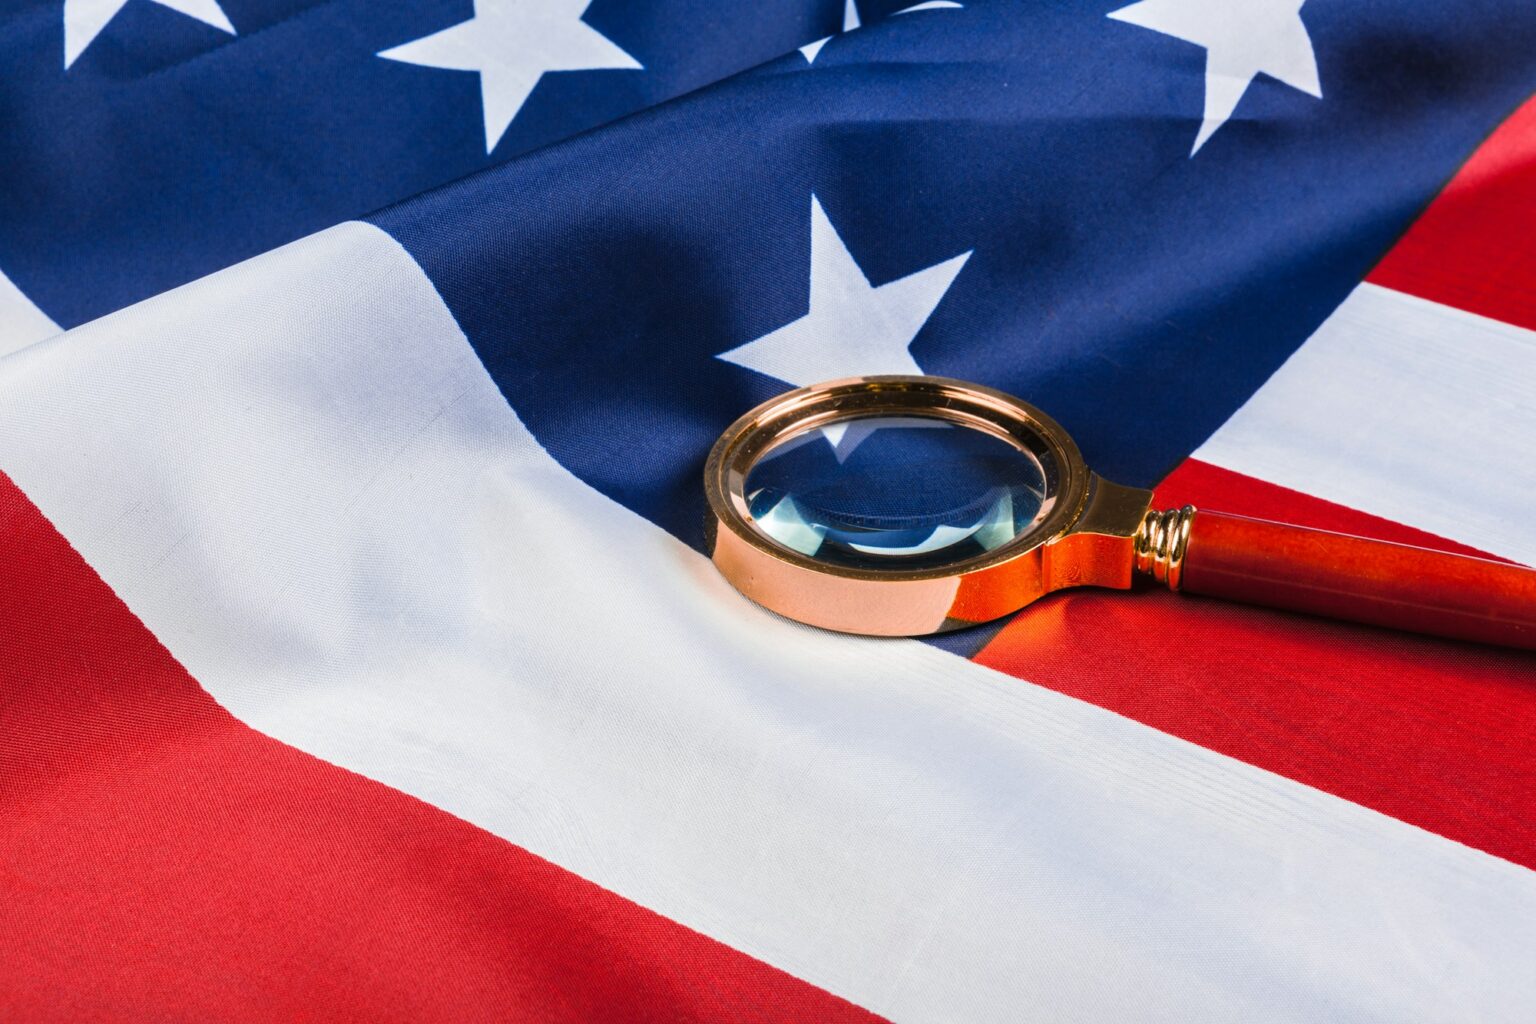 Flag of USA and a magnifying glass